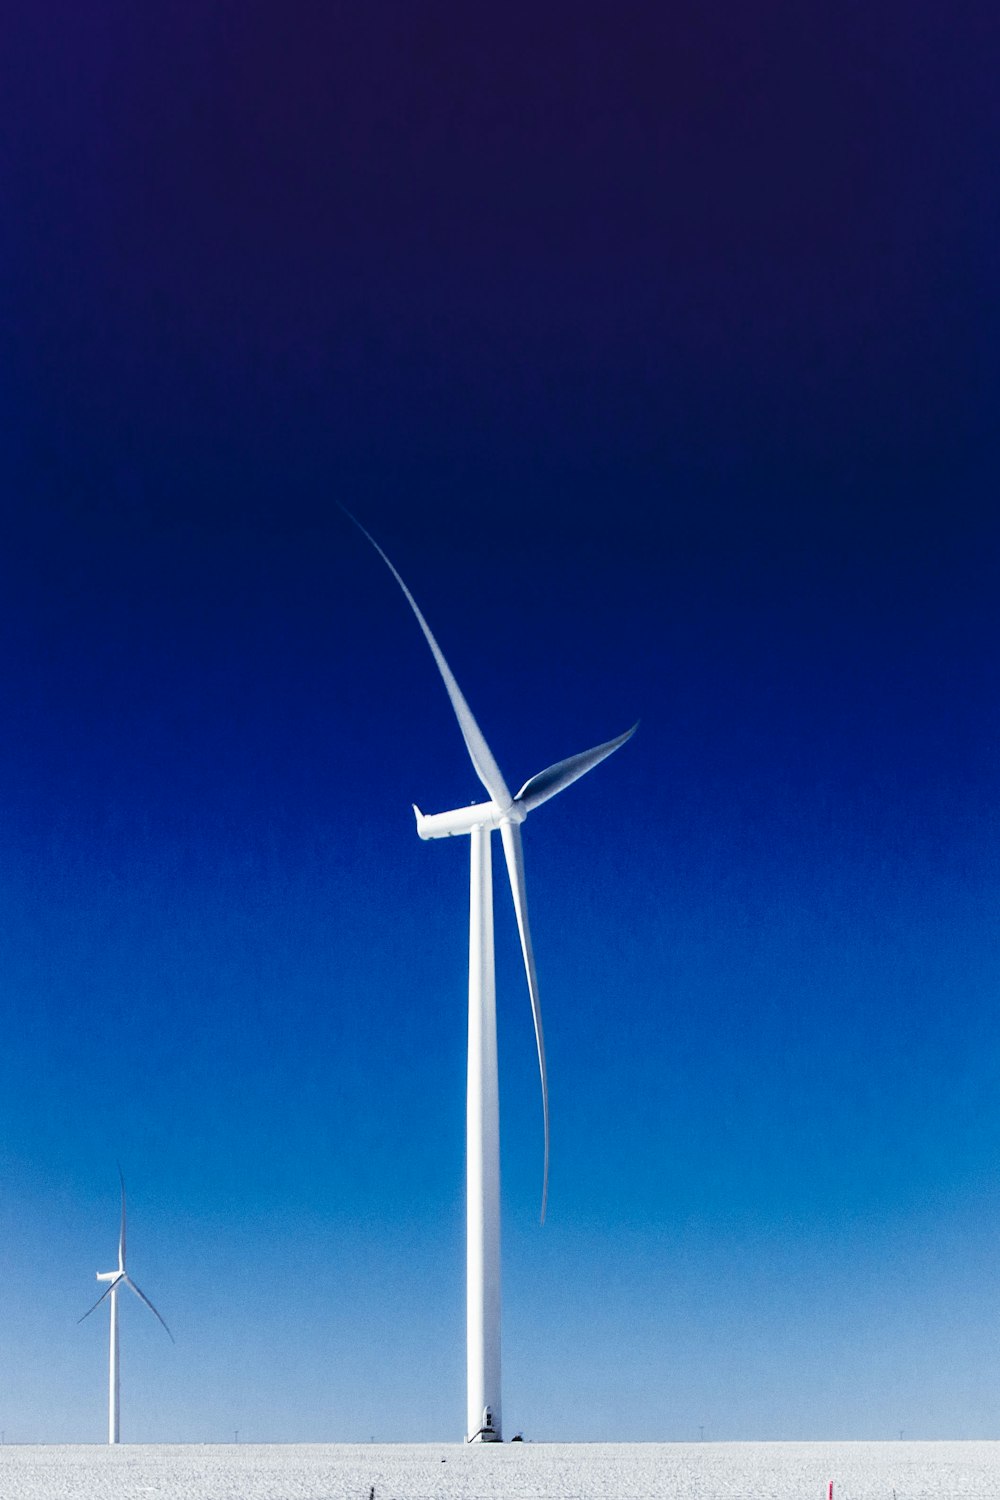 a group of wind turbines in a field